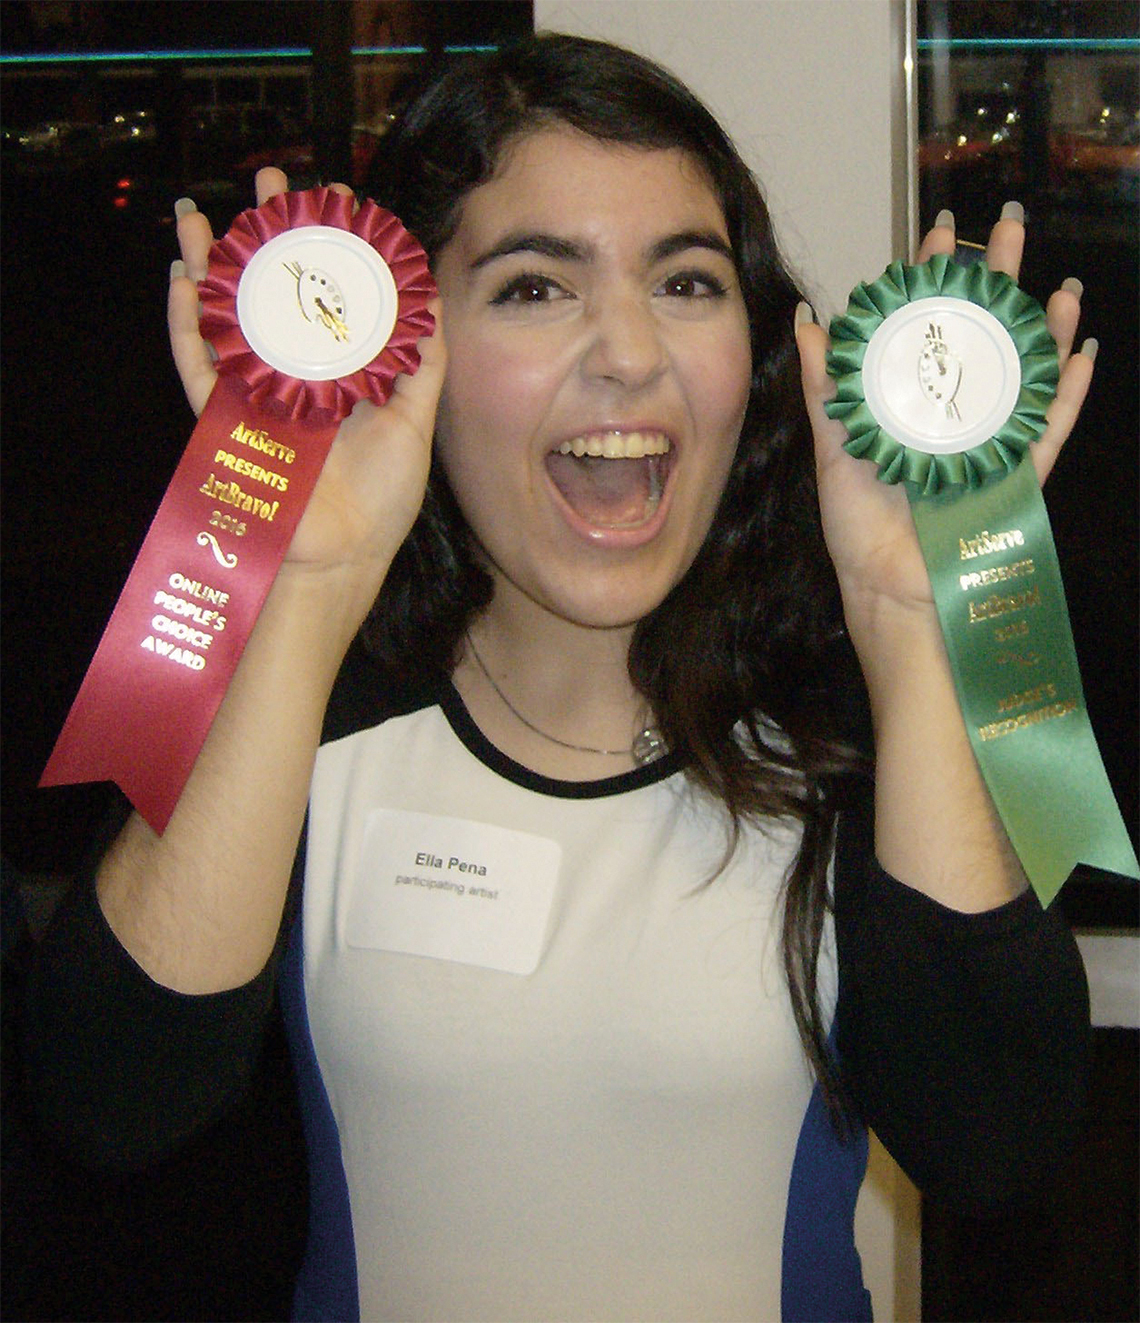 Westminster Academy junior Ella Peña was honored with both a “Judges Recognition” and the Online People’s Choice Award.